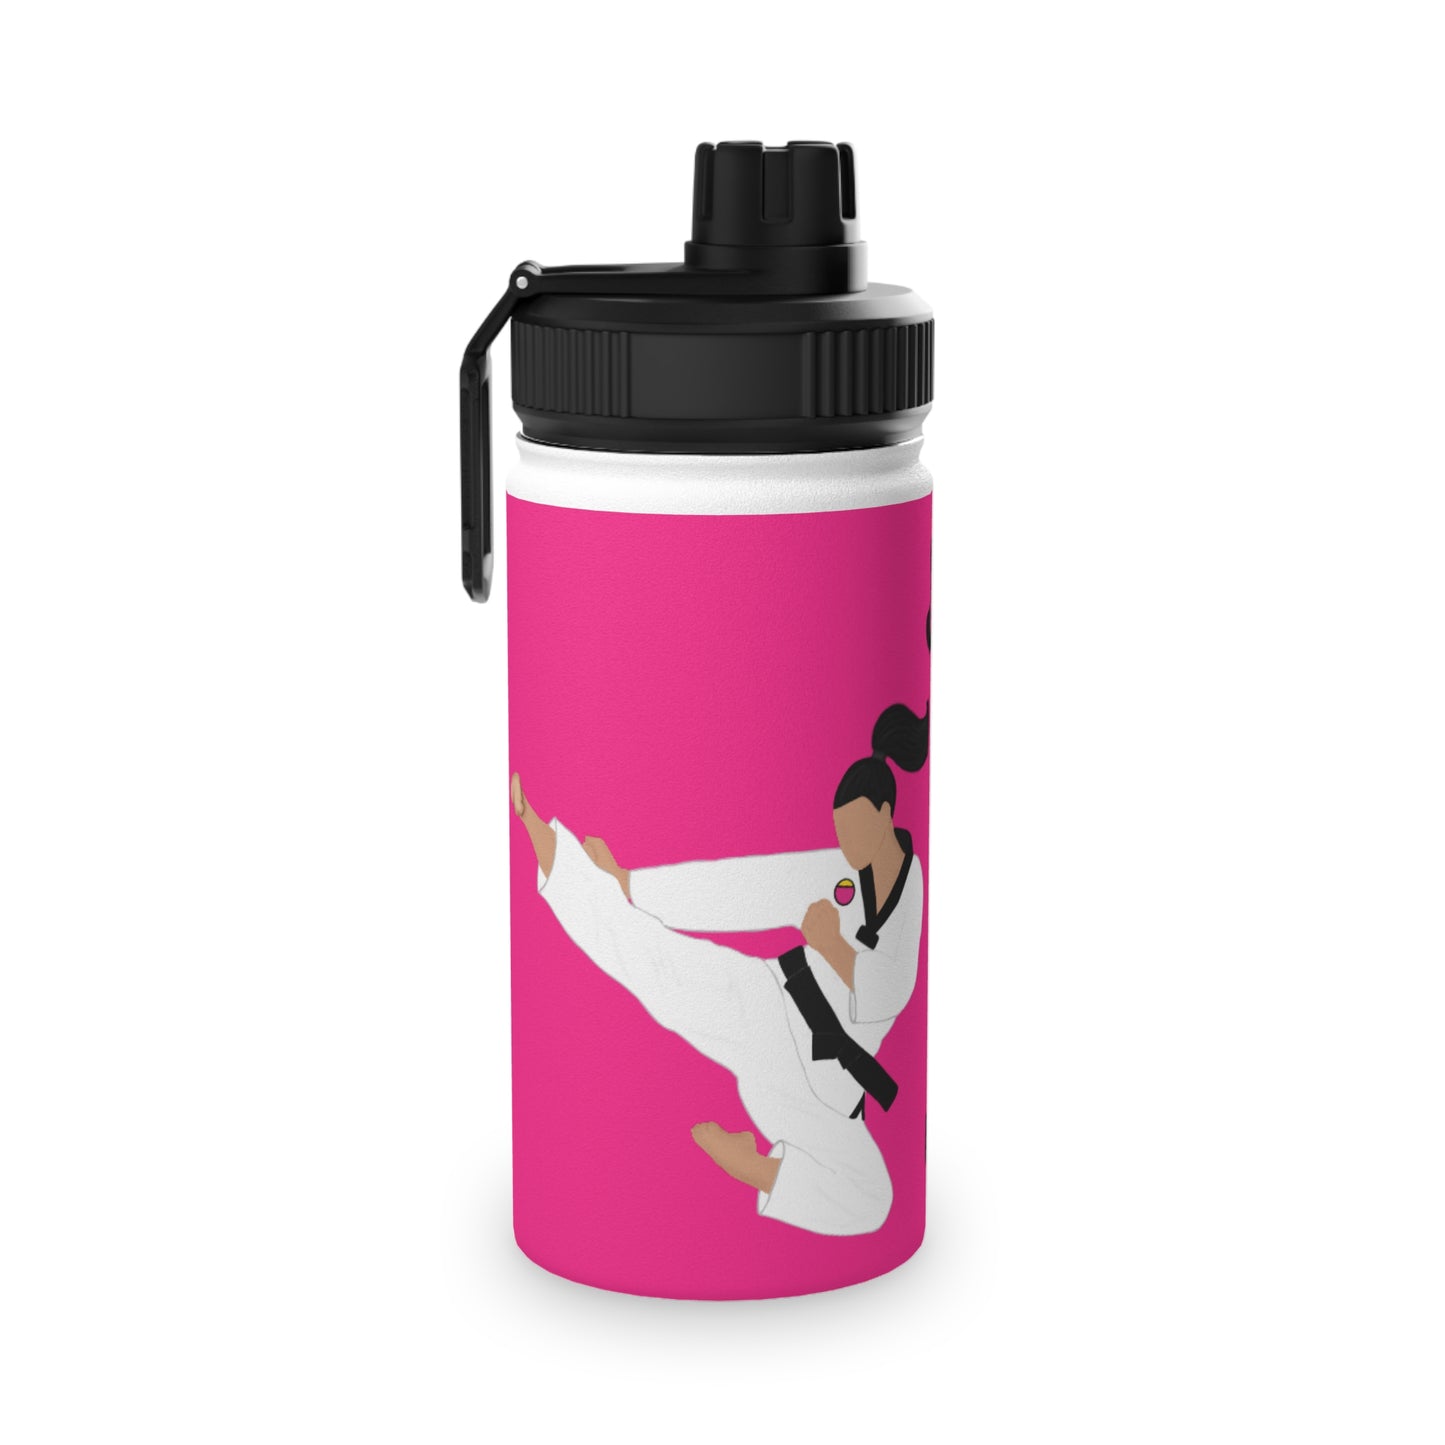 Active Cutie Martial Arts Taekwondo Stainless Steel Water Bottle (PICK YOUR SKIN TONE)